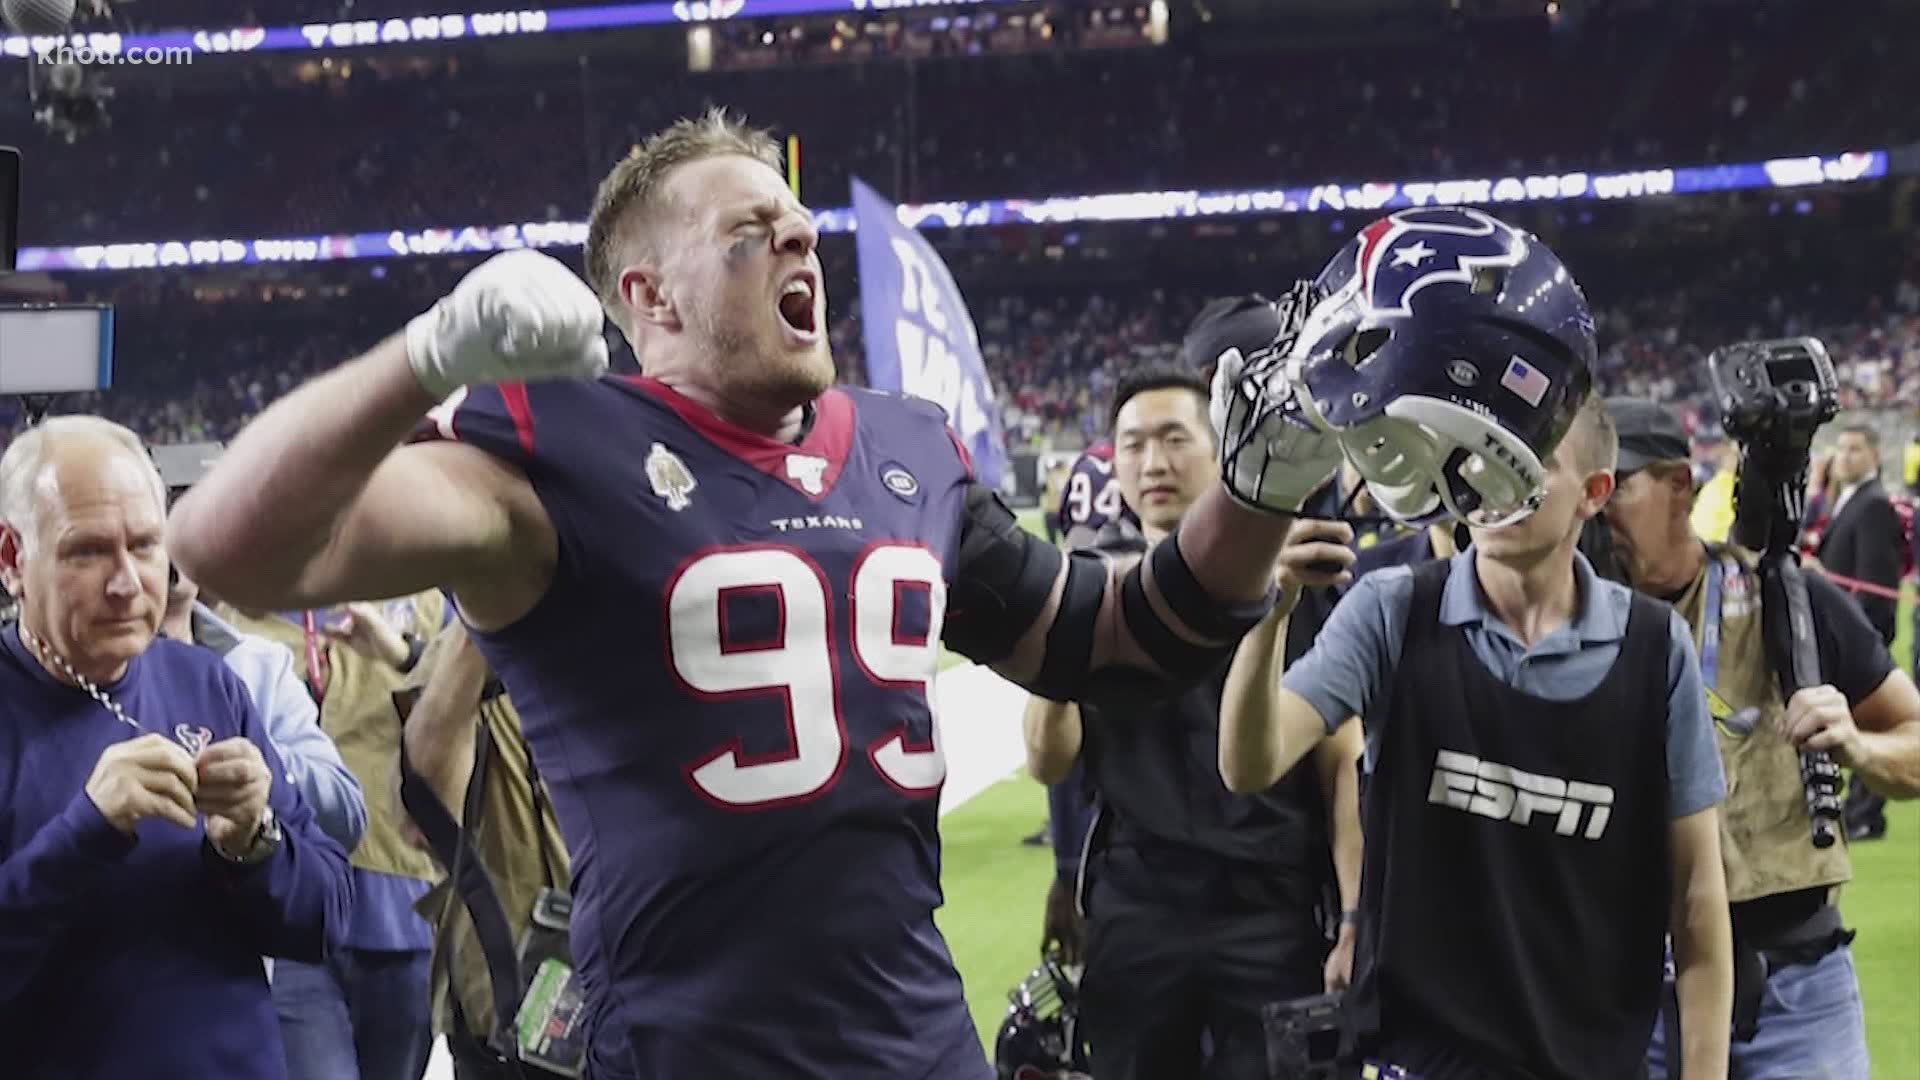 Houston Texan J.J. Watt off the field told Pro Football Talk that he might skip the season altogether if the NFL requires face shields.